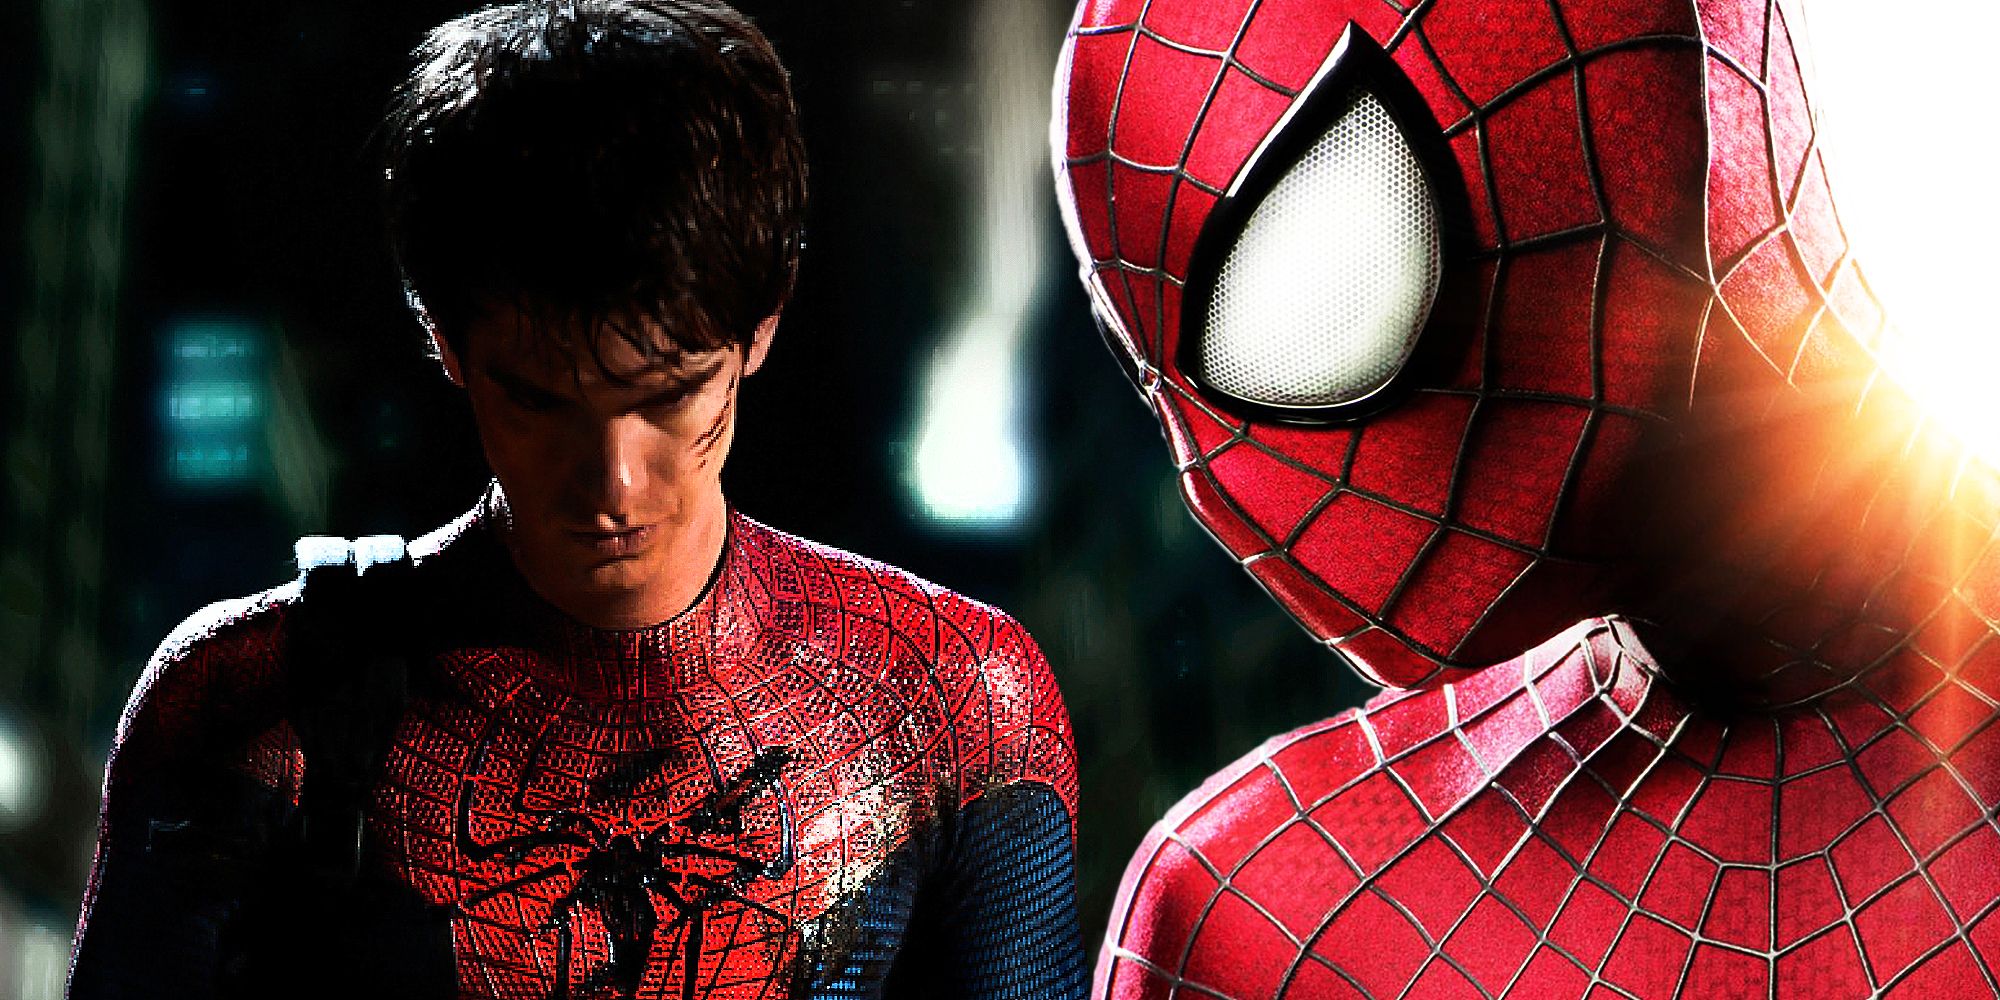 The Amazing Spider-Man 1 & 2 Andrew Garfield as Peter Parker and Spider-Man